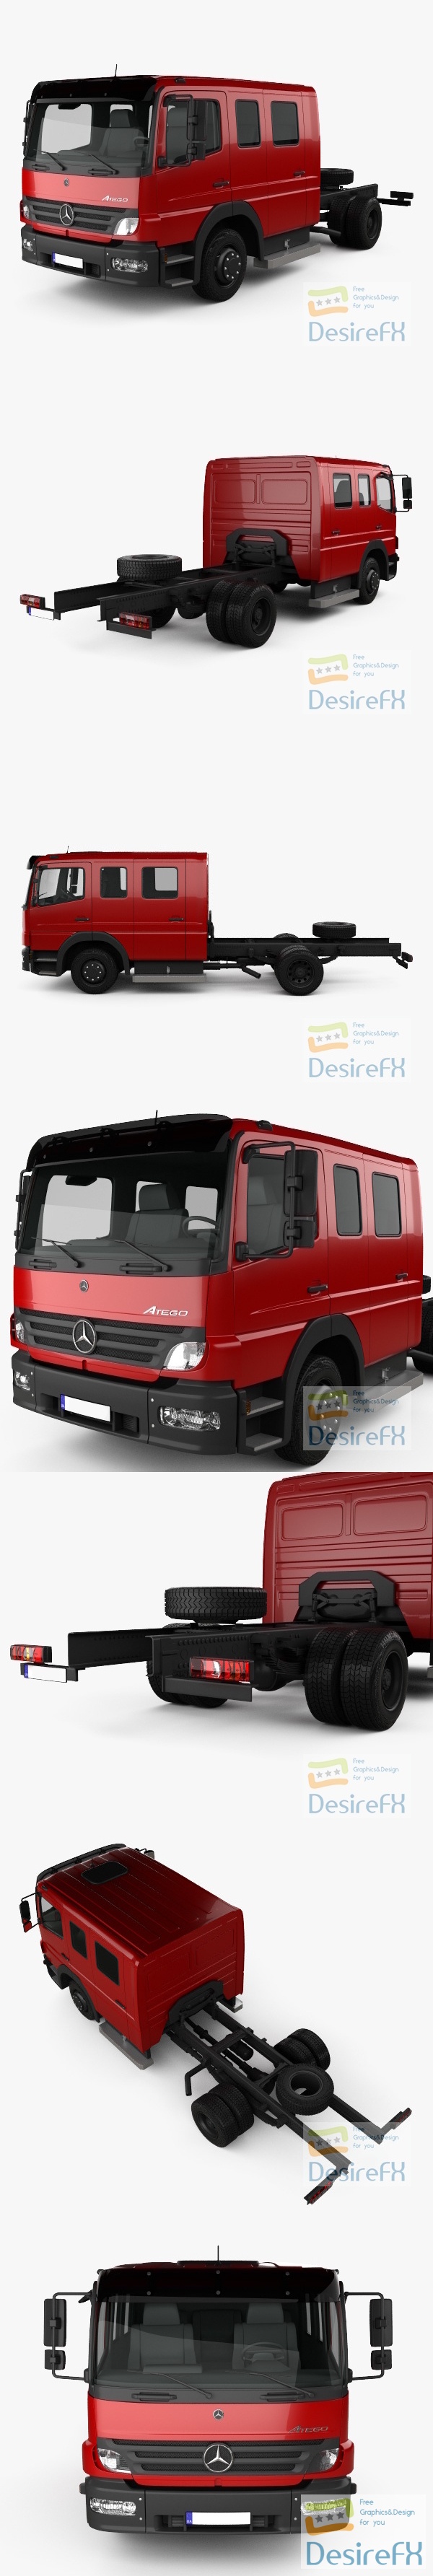 Mercedes-Benz Atego Crew Cab Chassis Truck 2004 3D Model